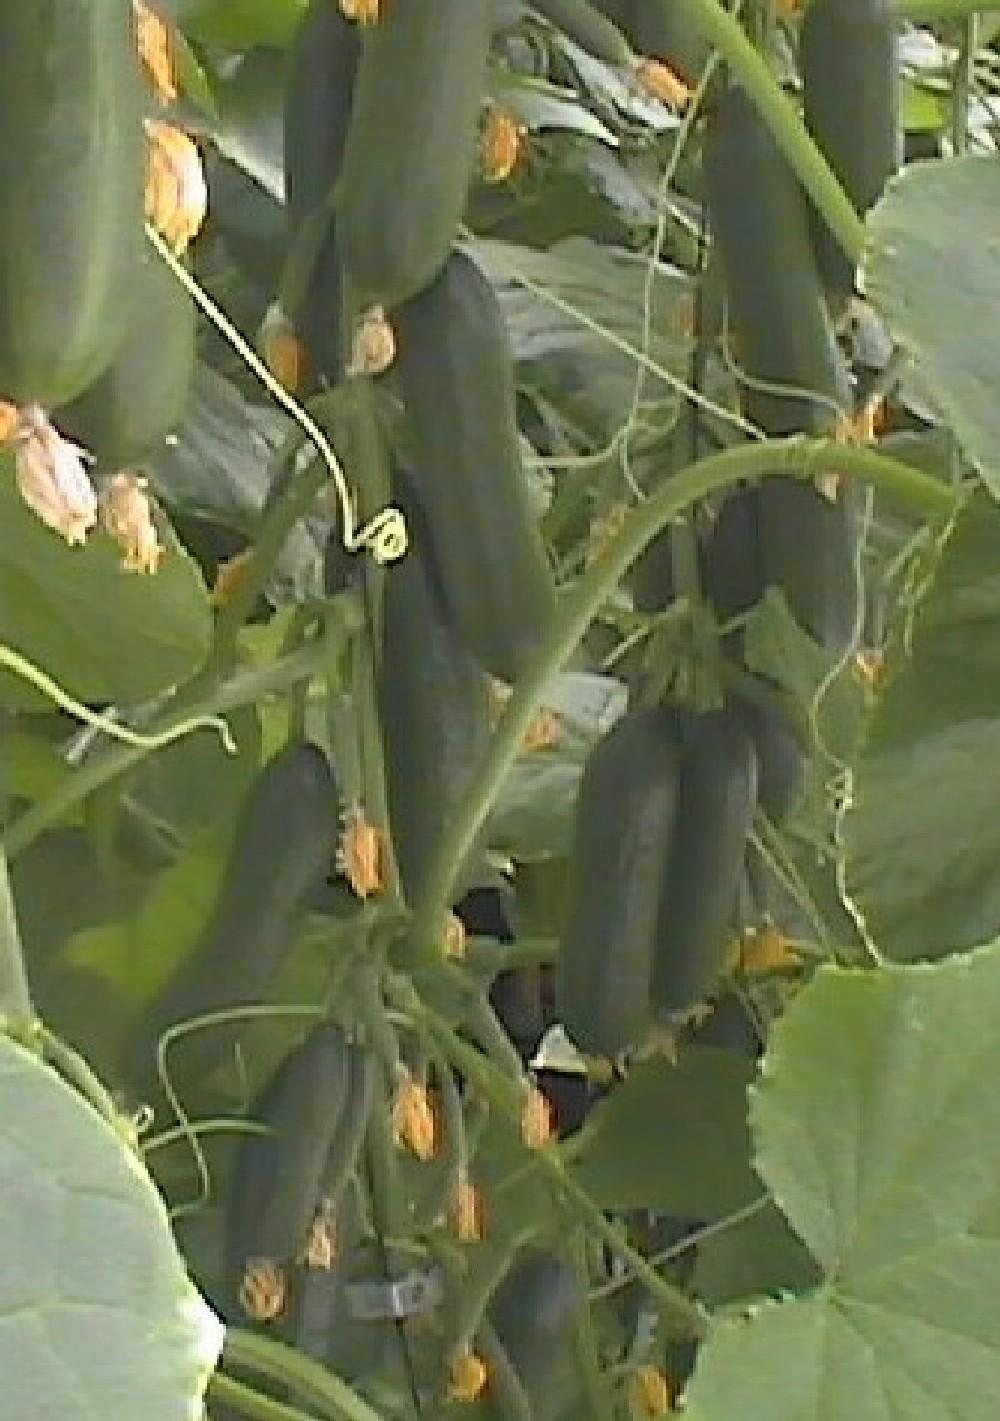 Beit Alpha Cucumber: A New Greenhouse Crop for Florida 2 48), both available through the EDIS (Electronic Data Information Source) On-line Catalog (edis.ifas.ufl.edu).